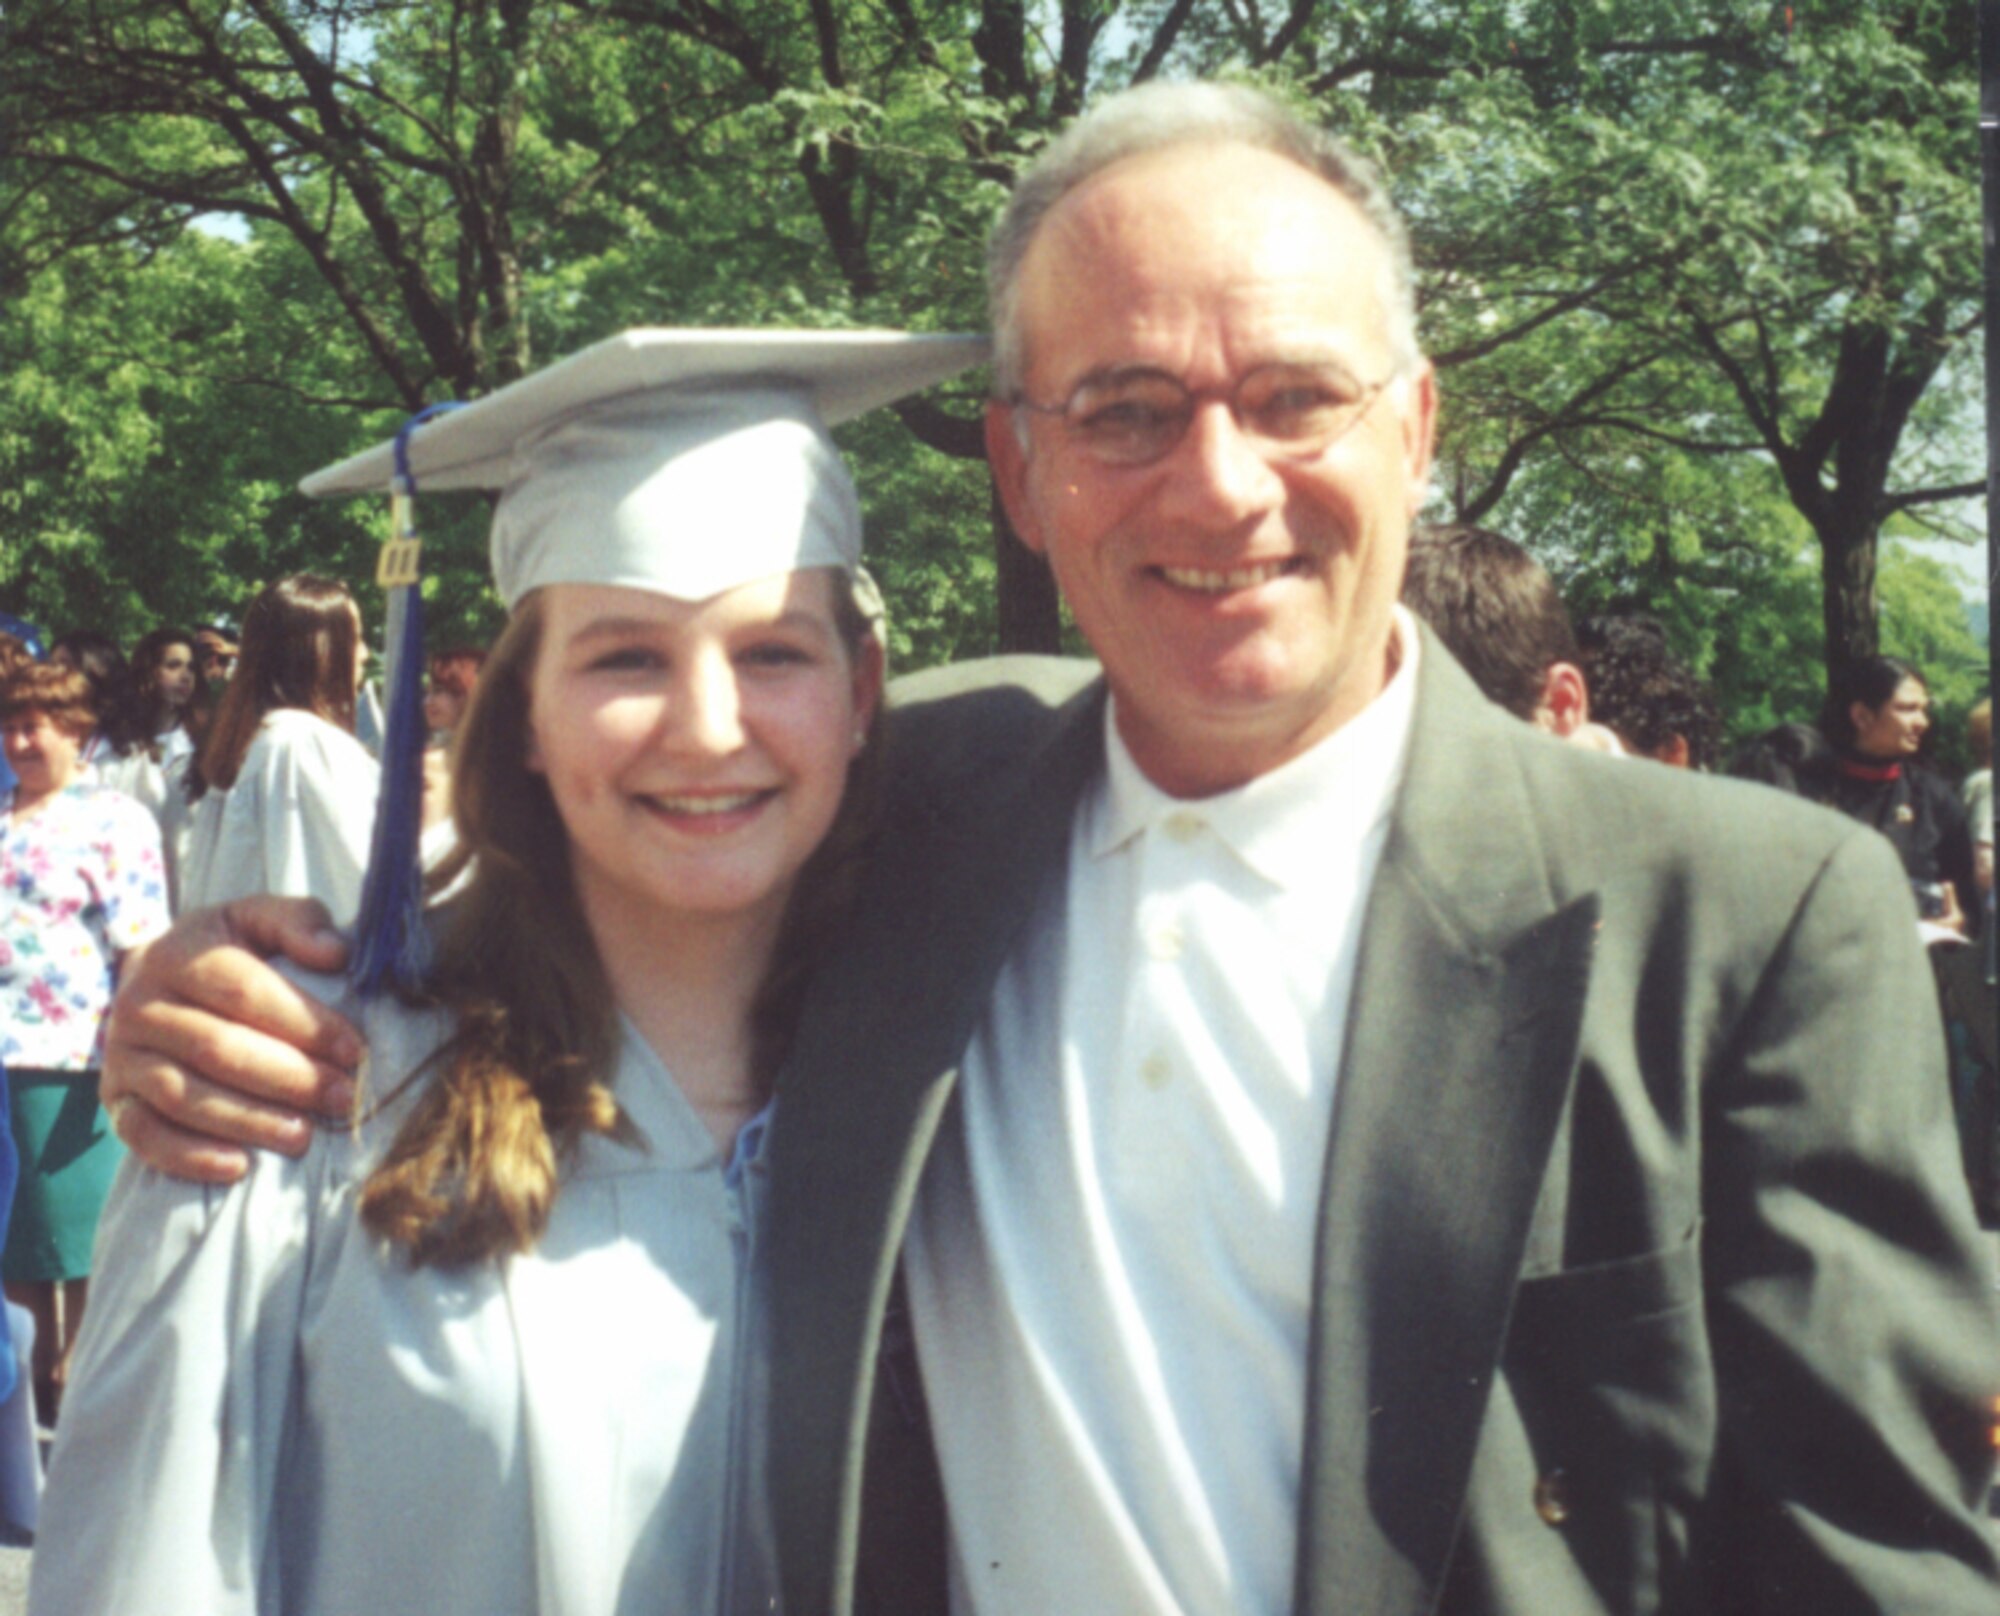 (Left) Kimberly Hollowell stands with Maj. Jose Troche, her AFJROTC instructor, during her 2001 high school graduation ceremony.